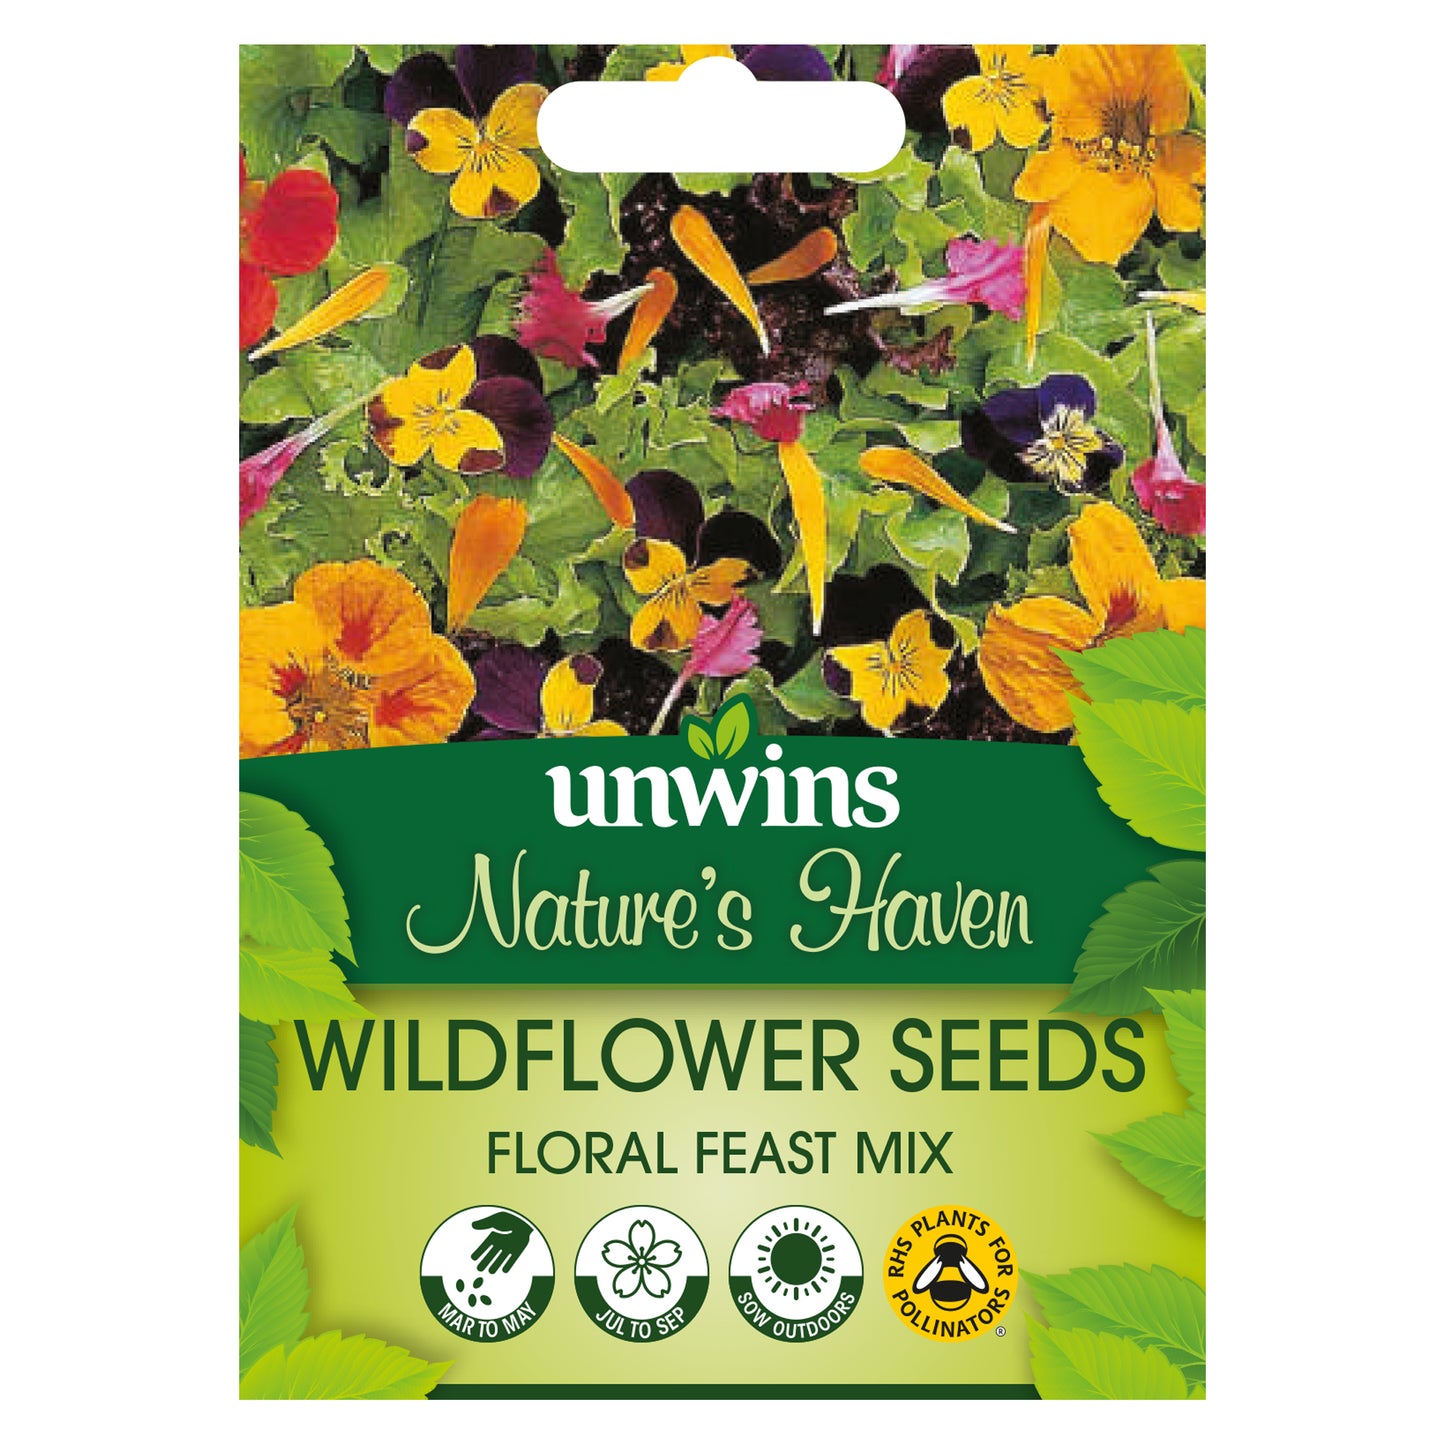 Nature's Haven Wildflower Seeds Floral Feast Mix Seeds front of pack